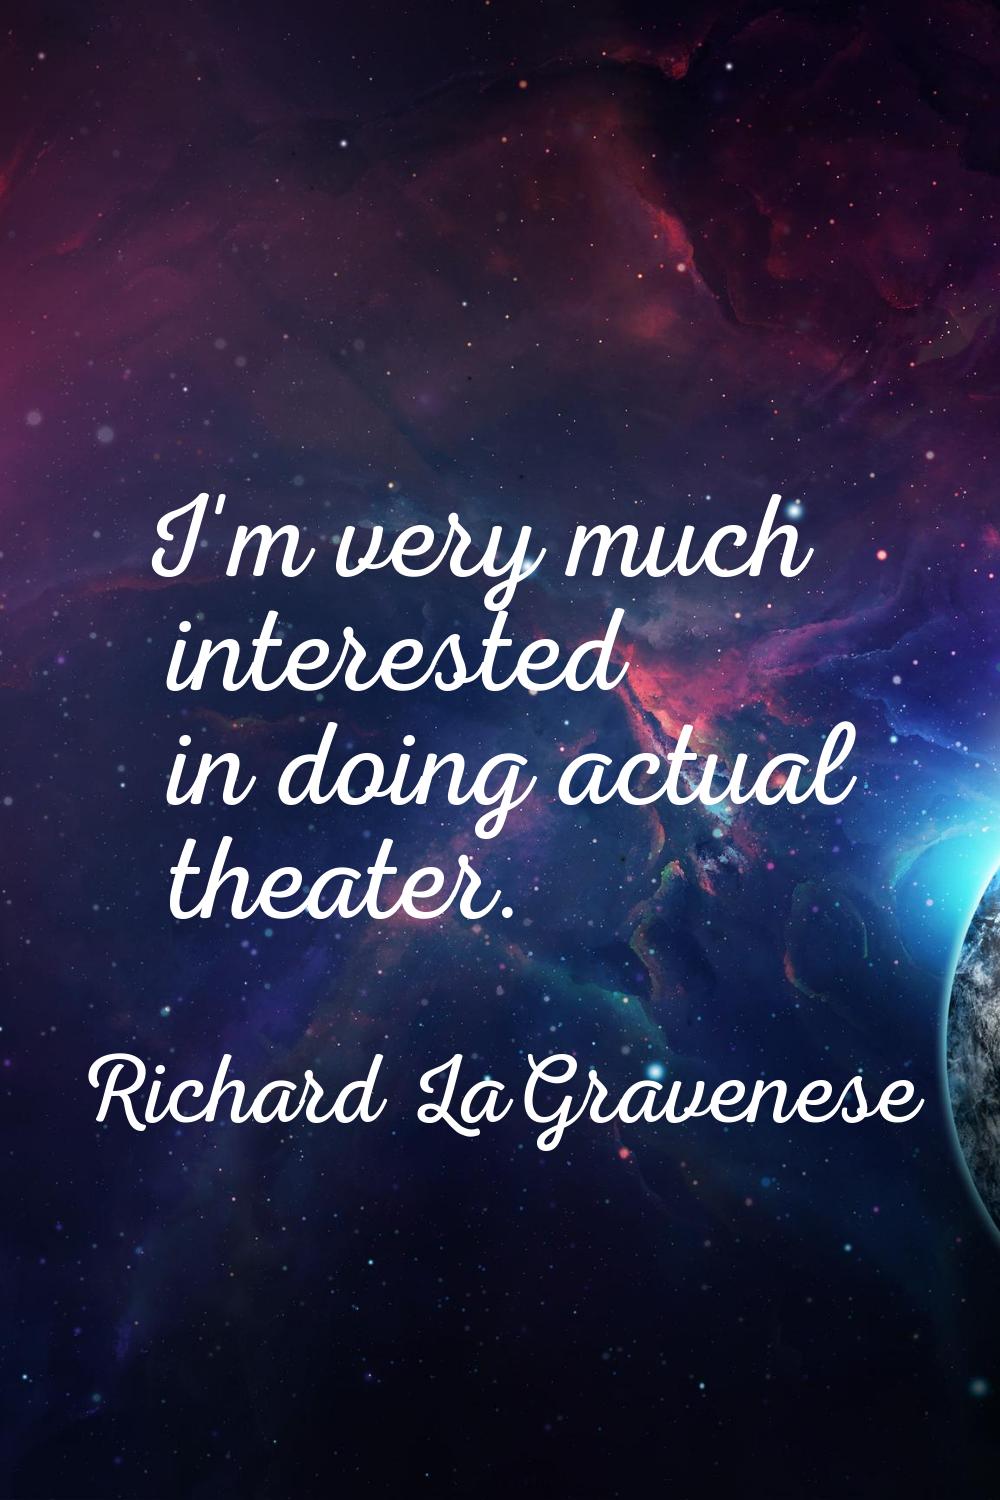 I'm very much interested in doing actual theater.